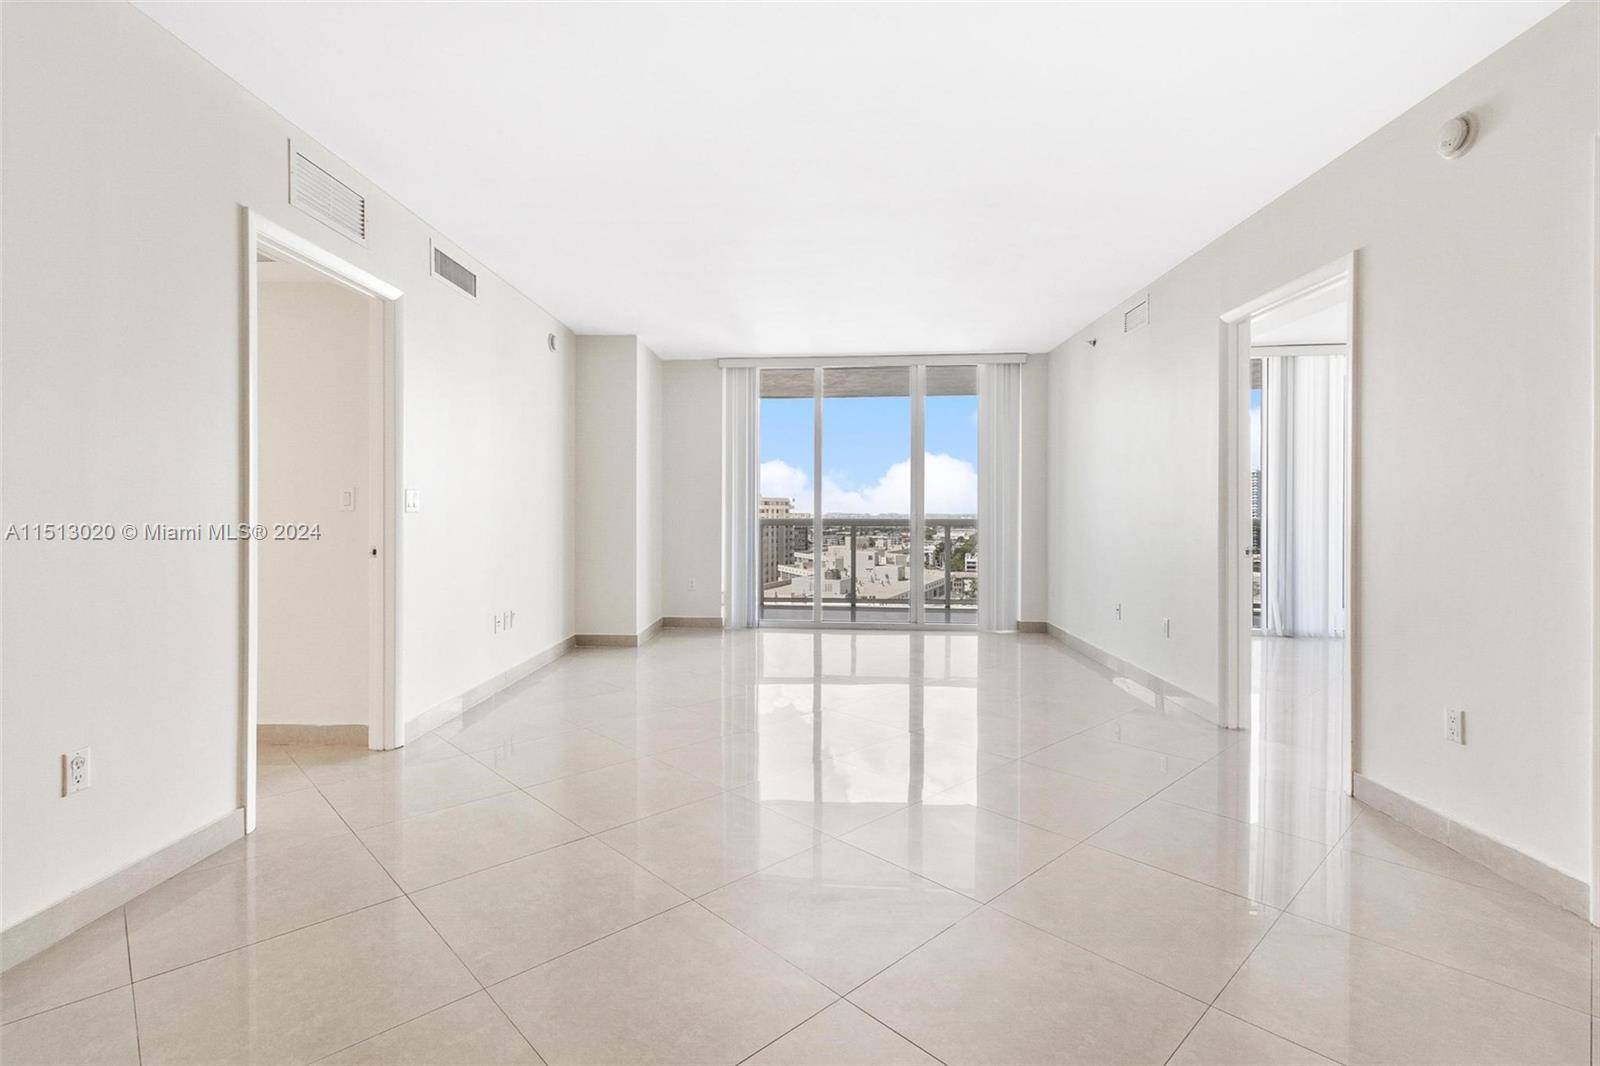 Experience awe inspiring views of the intracoastal and city from this 2 bedroom plus den, 3 bathroom residence spanning 1, 571 square feet, complete with a 177 square foot balcony.